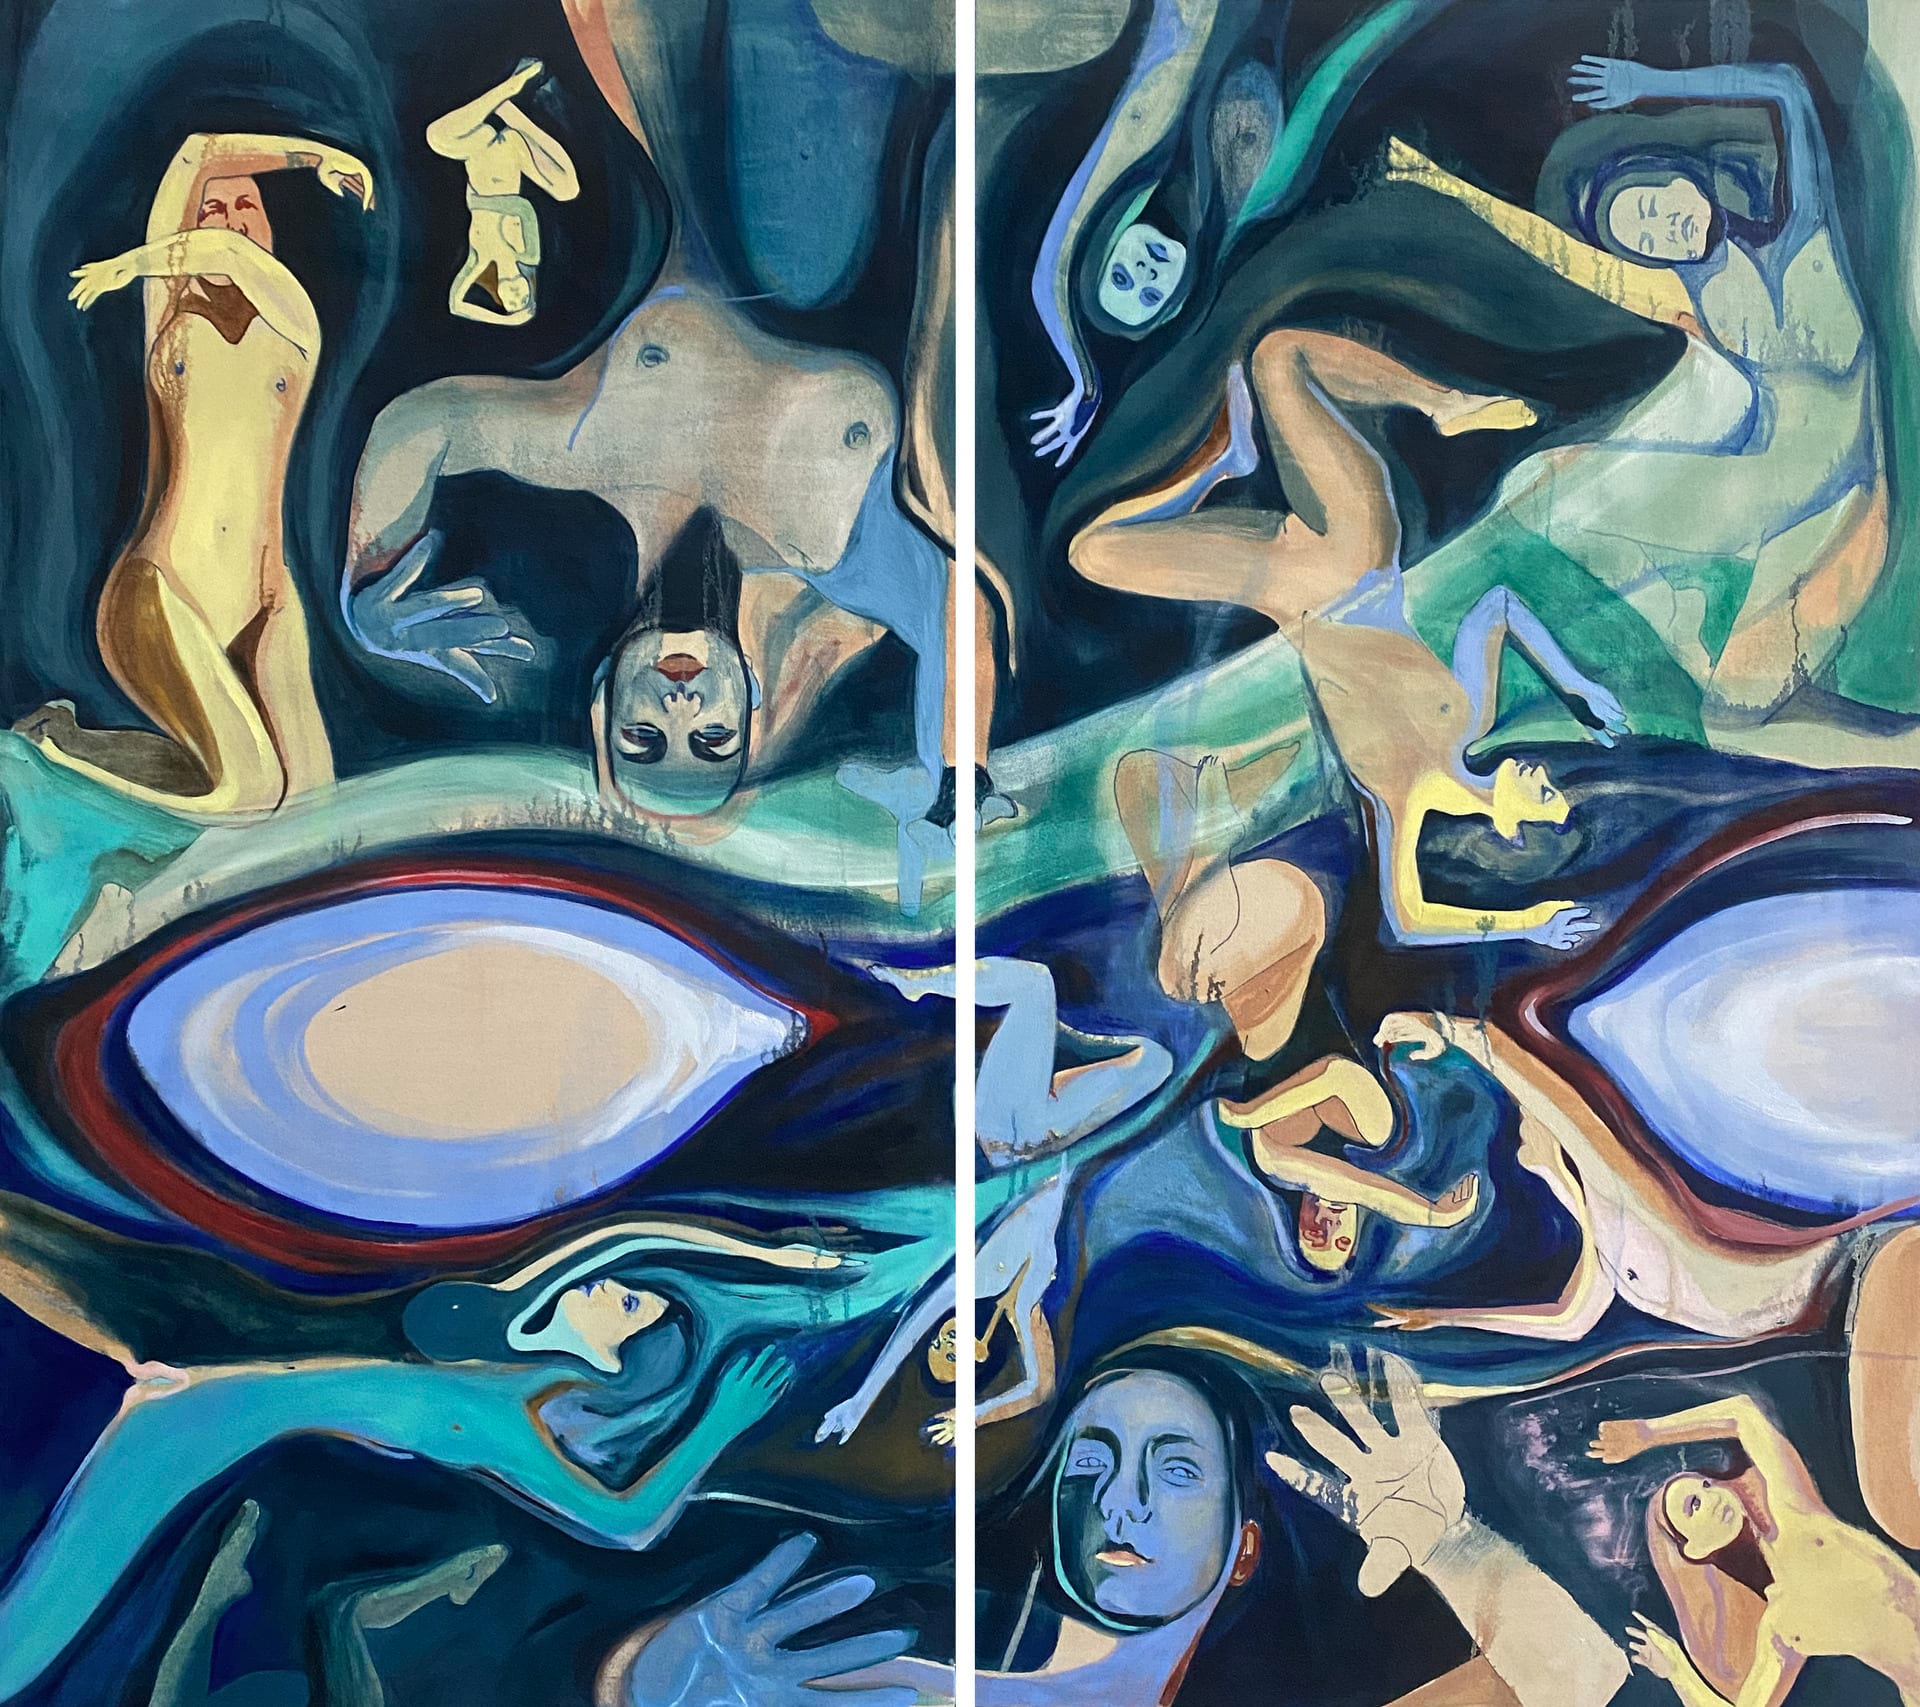 Abstract image of numerous human nudes floating in different directions, in shades of blue, green and yellow, spread across two separate rectangular panels..